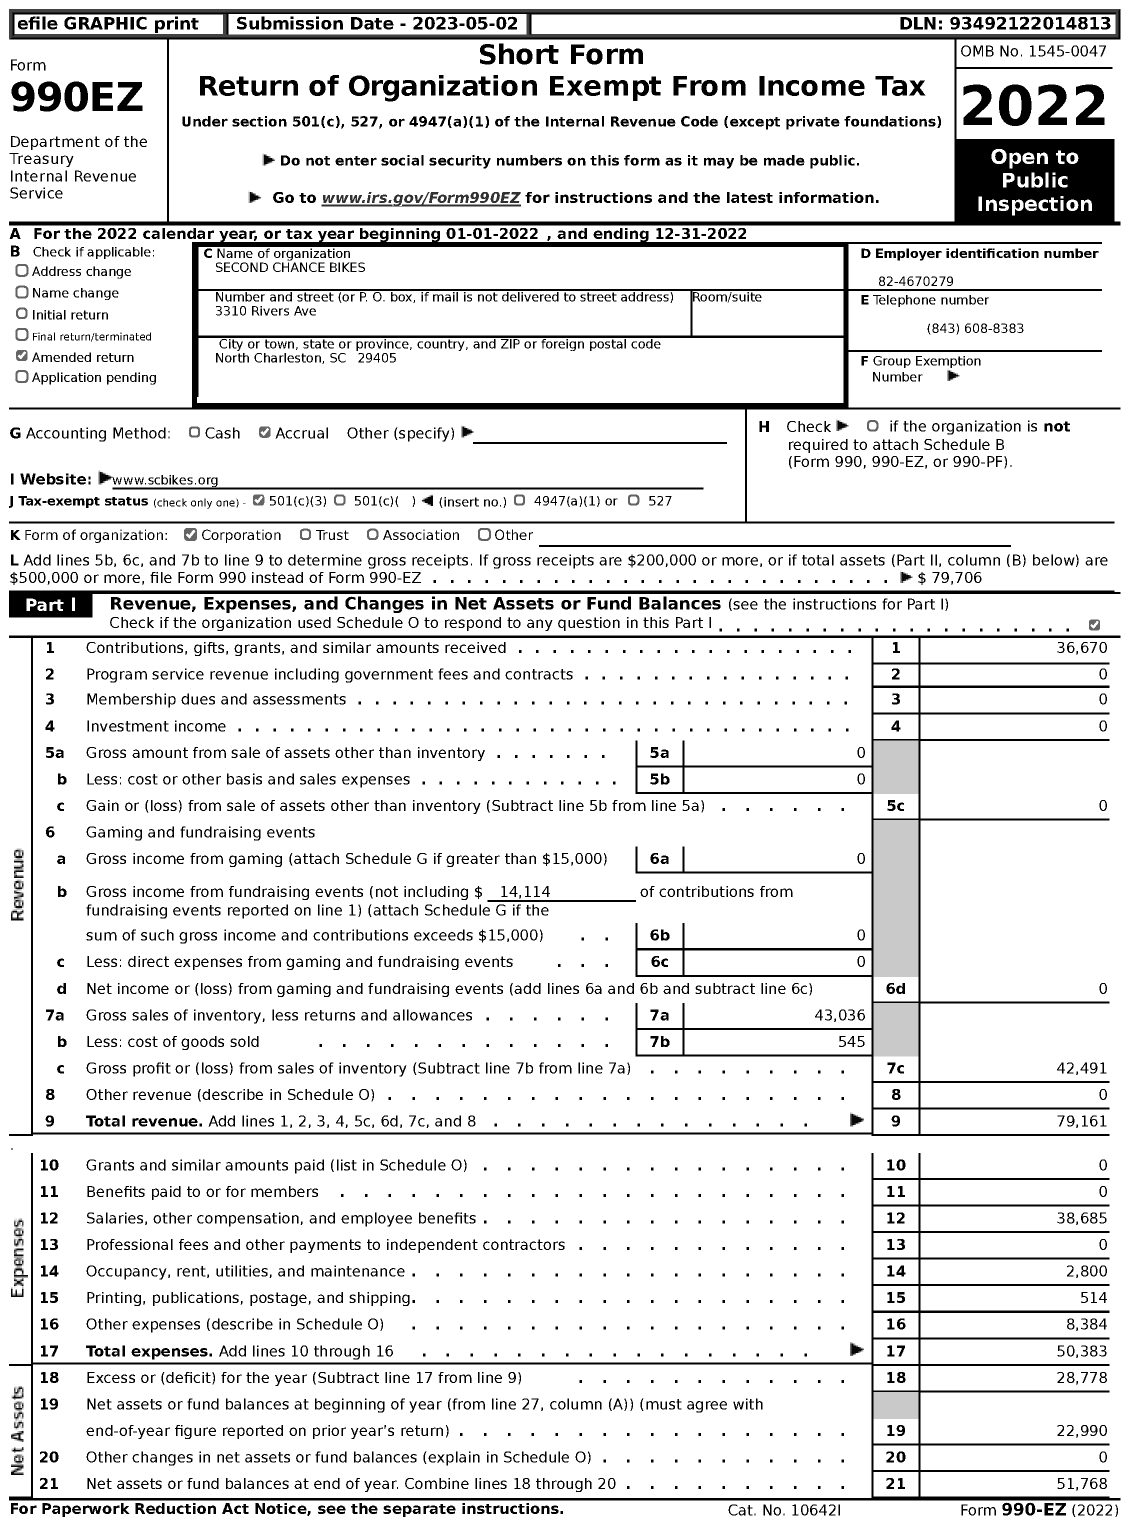 Image of first page of 2022 Form 990EZ for Second Chance Bikes